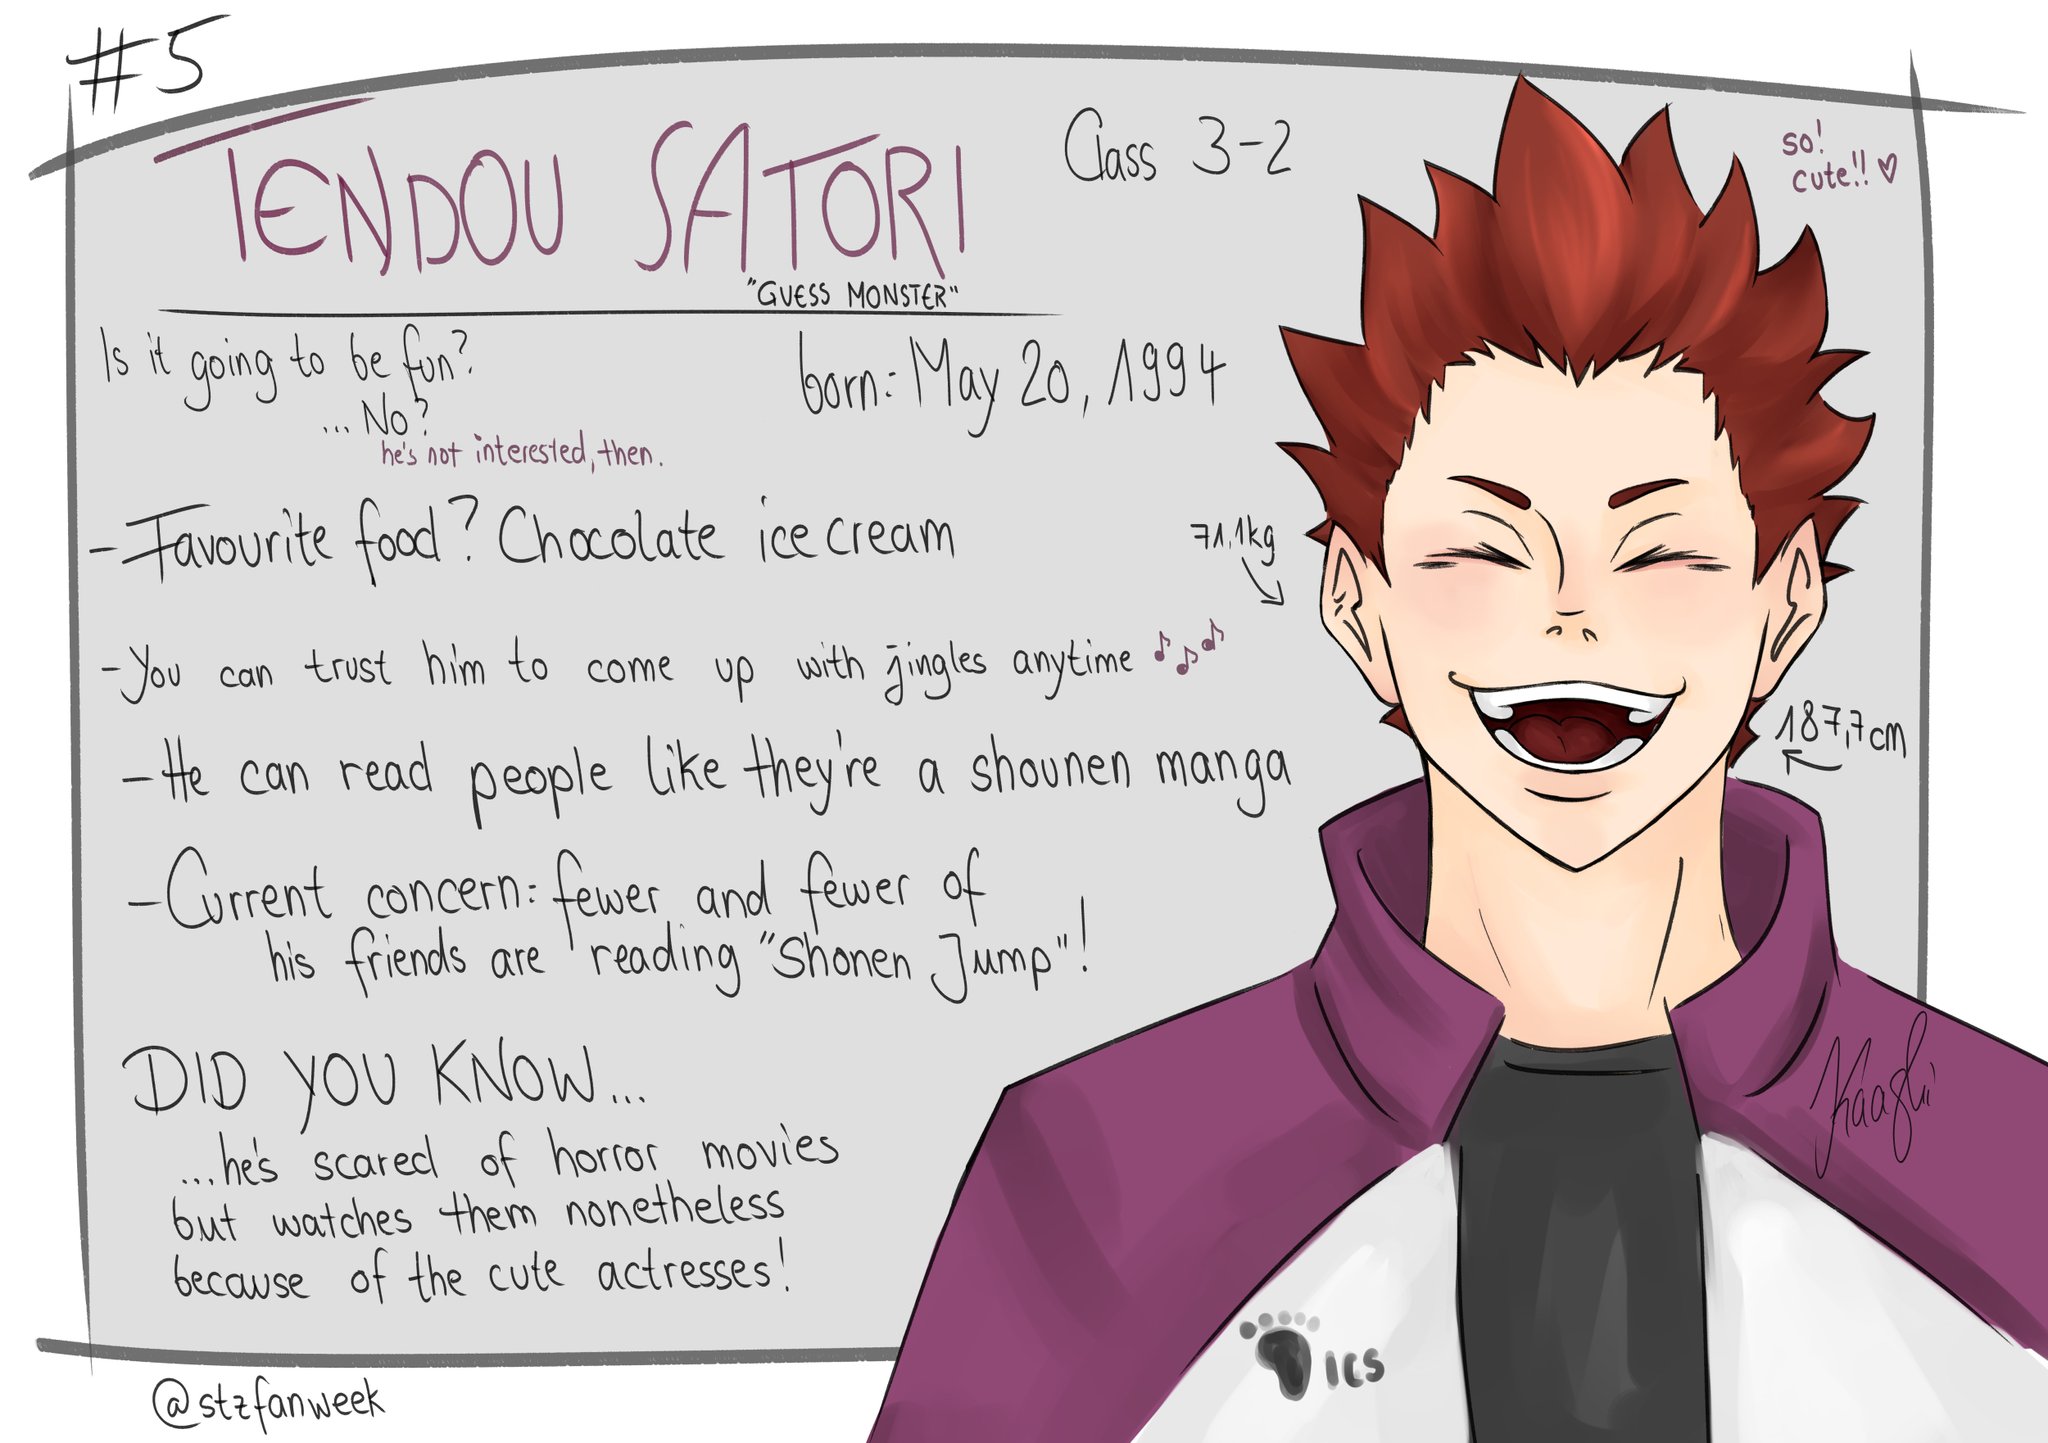 Satori Tendo is not like the other players 😨 #anime #haikyuu #fyp